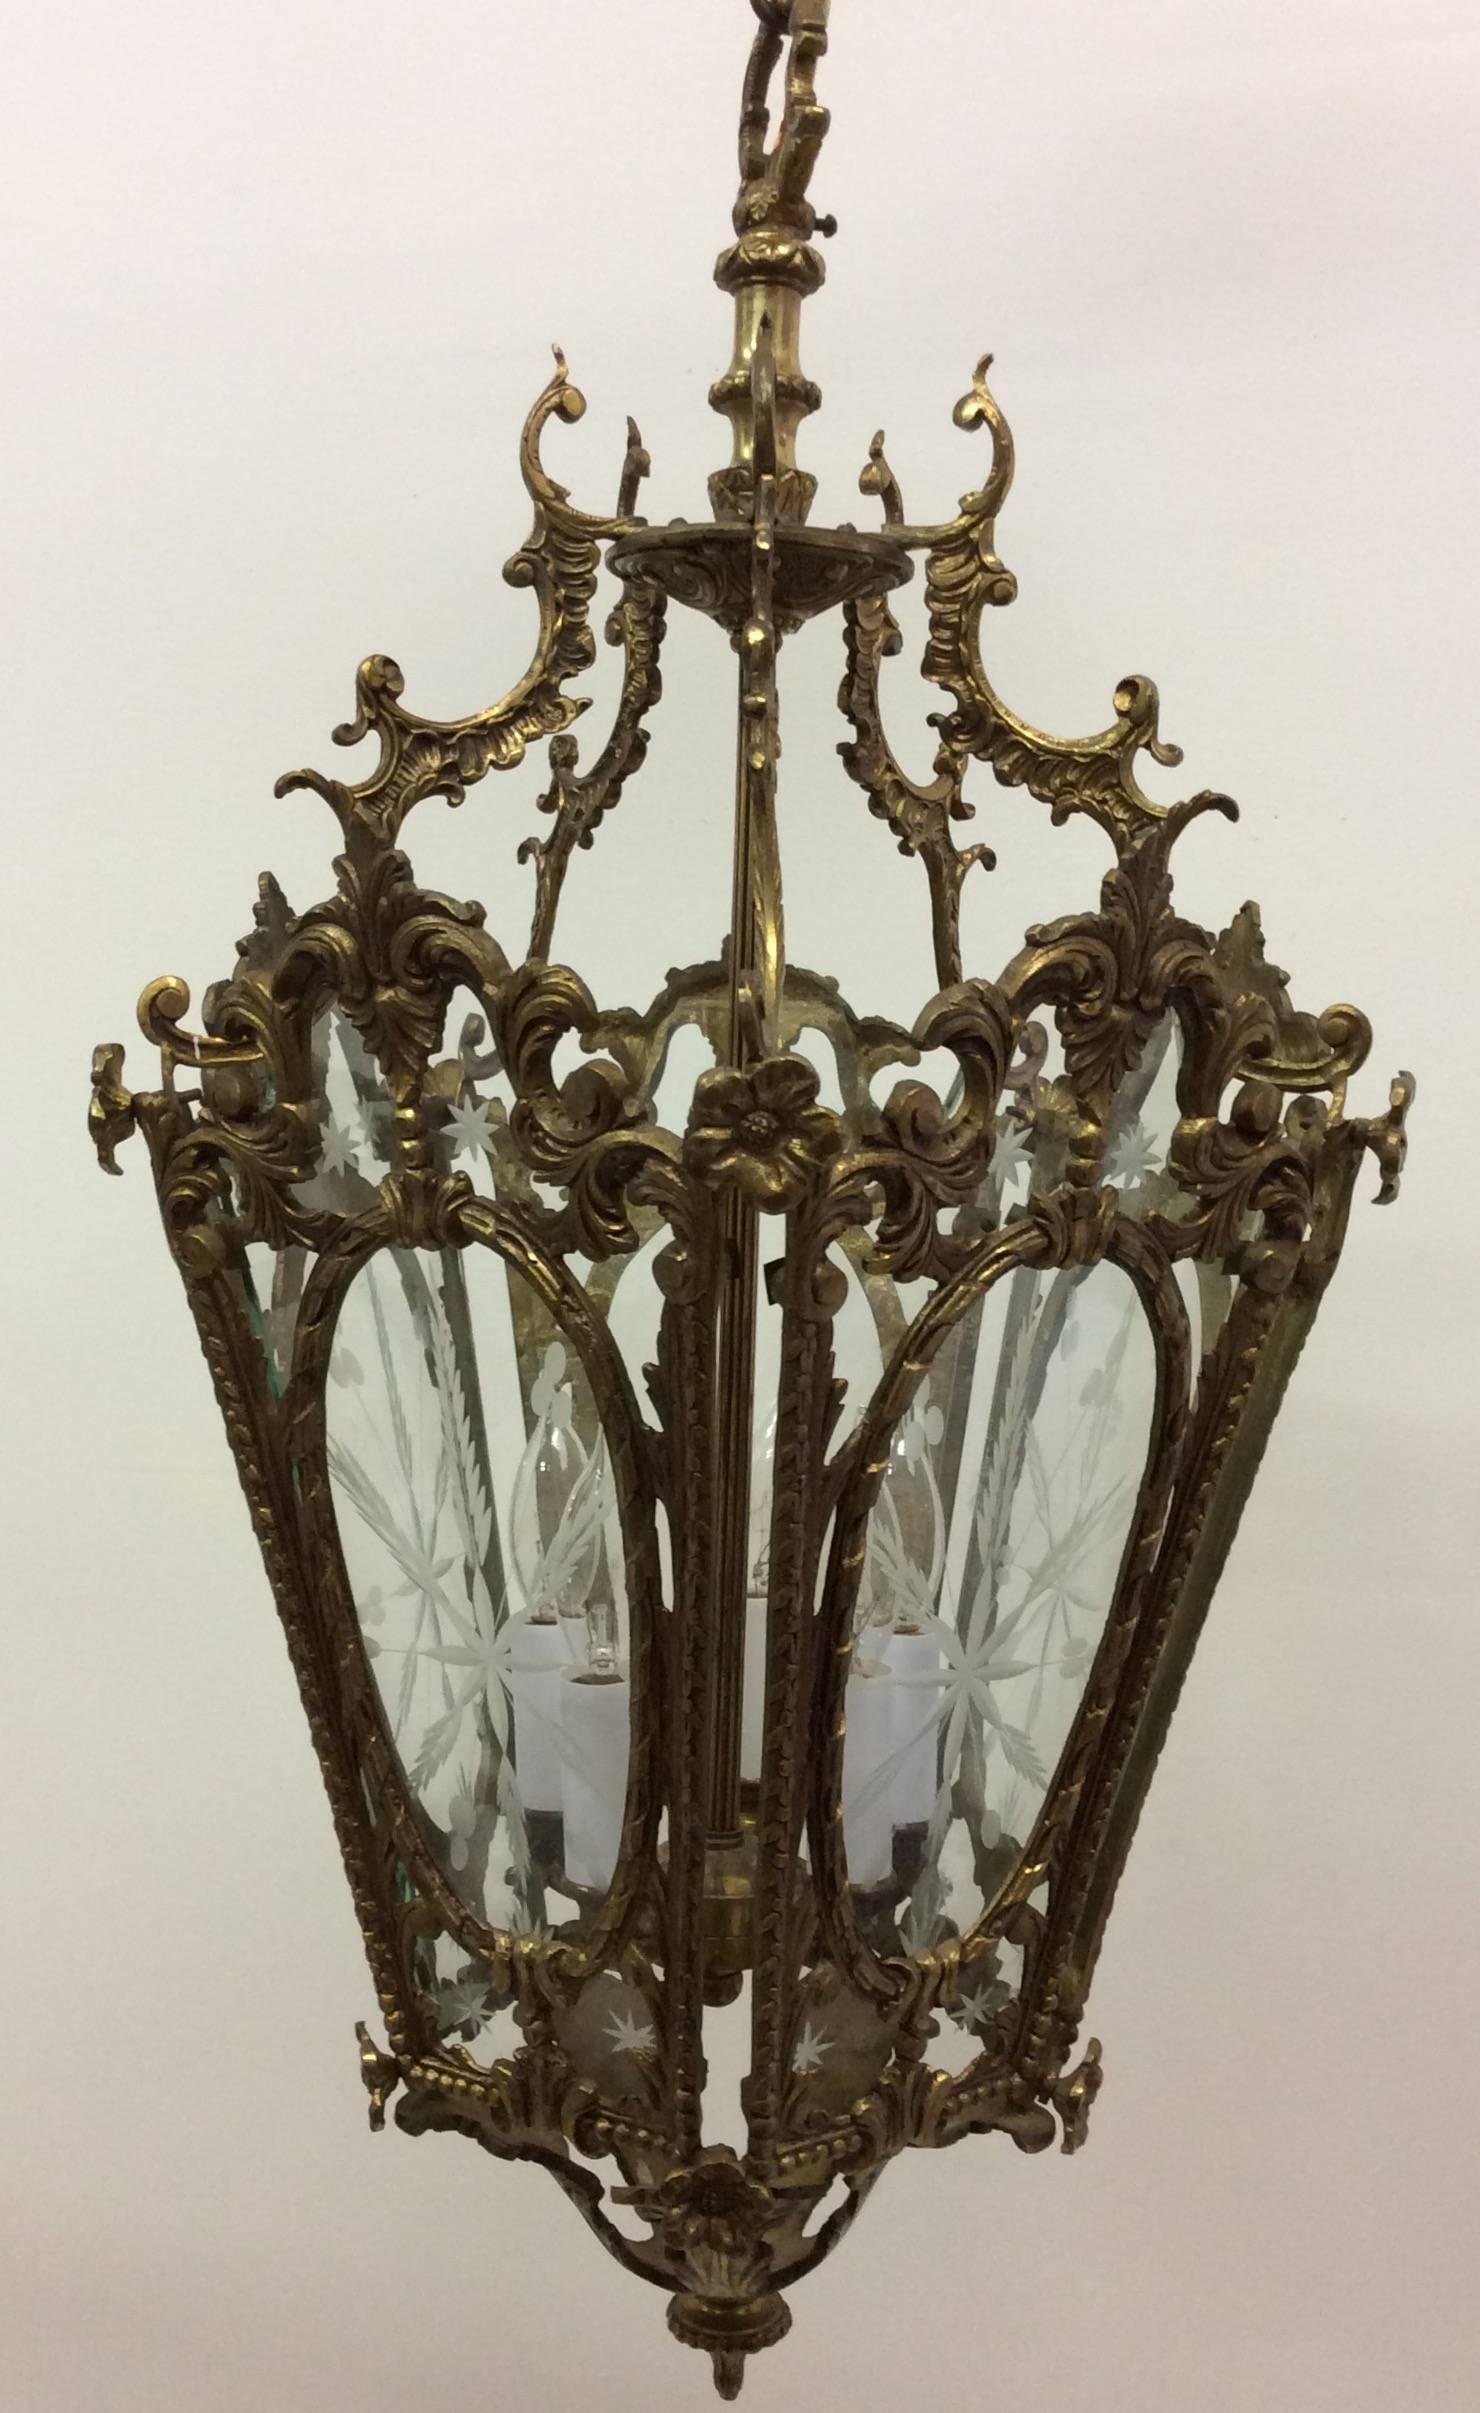 1950s, Spanish etched glass ornate brass lantern with five lights. Restored and rewired to UL. Etched starburst design on clear glass panels. Perfect piece for a foyer or small powder room.